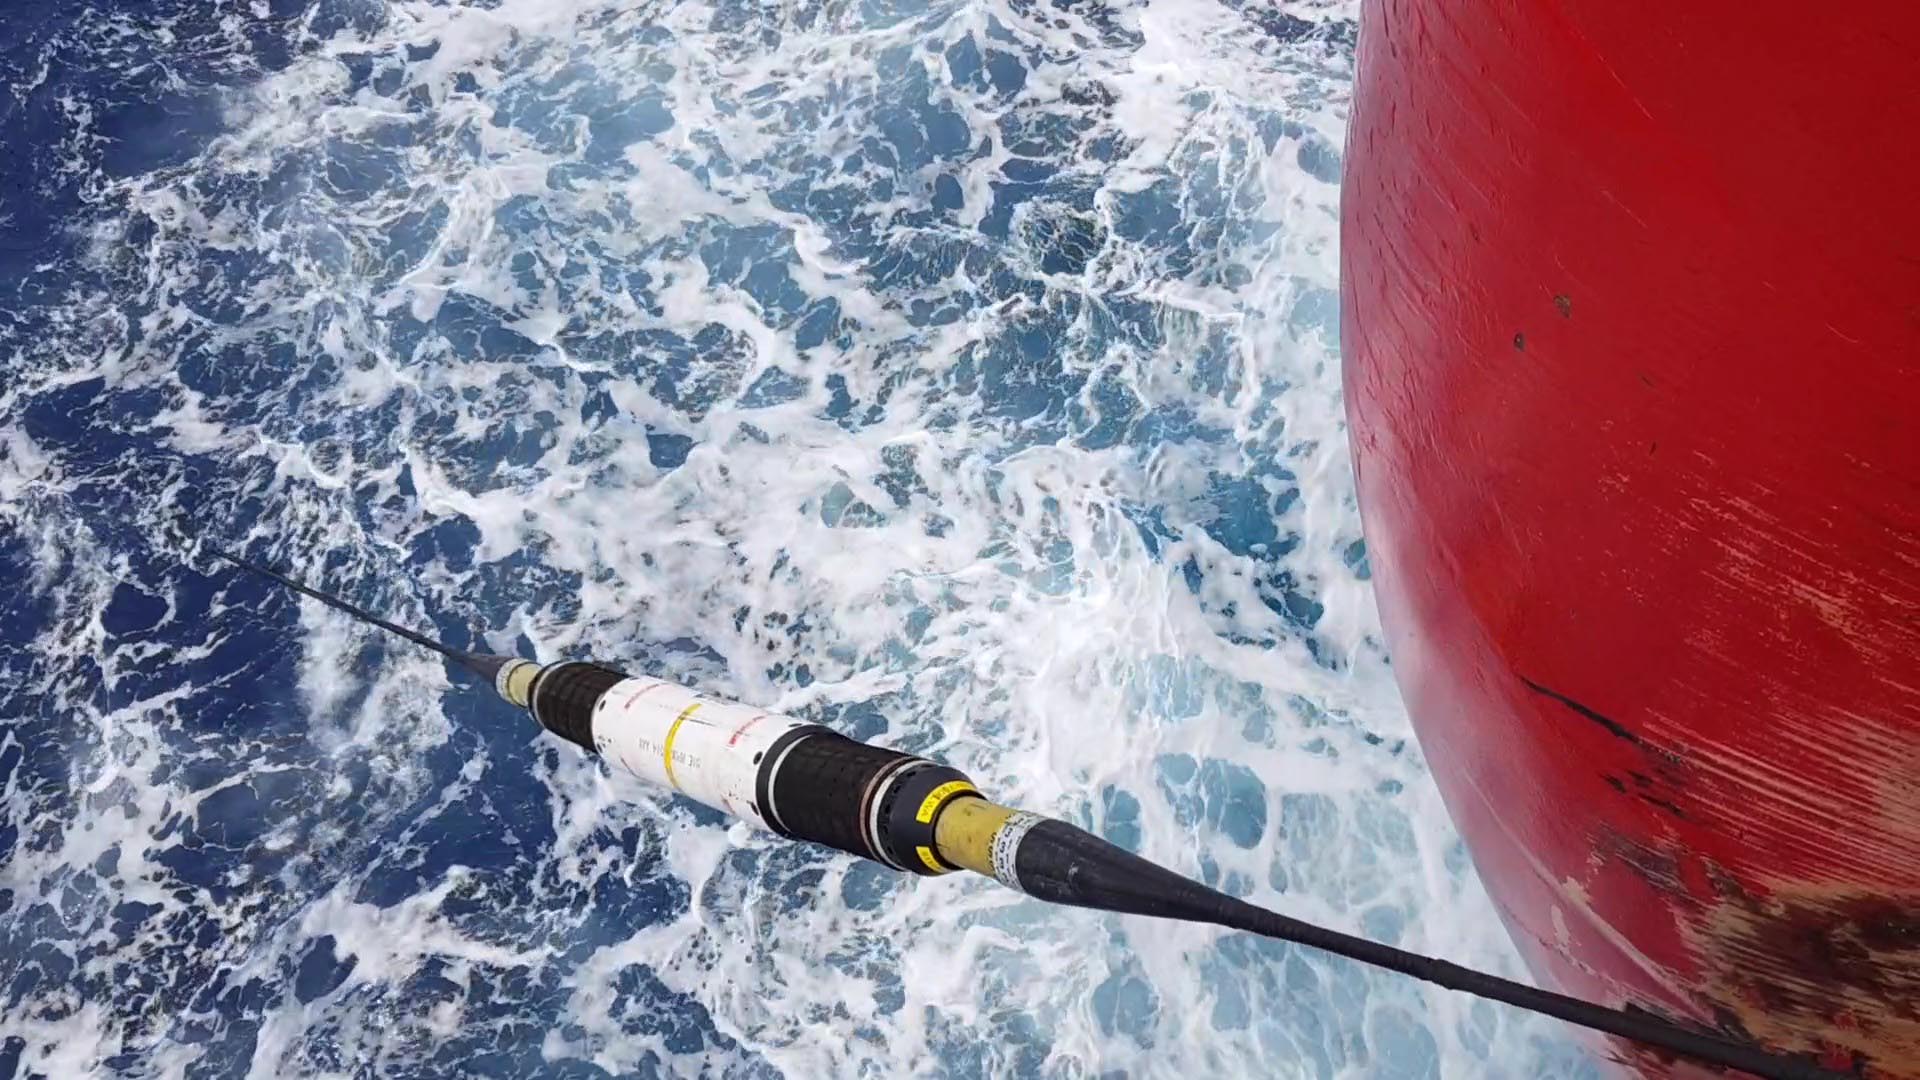 Utilizing recent developments in fiber optic technology, including spatial division multiplexing and the latest innovations in repeaters and transponders, the Malbec subsea cable will enable more individuals and businesses to get online to a faster, more reliable internet.